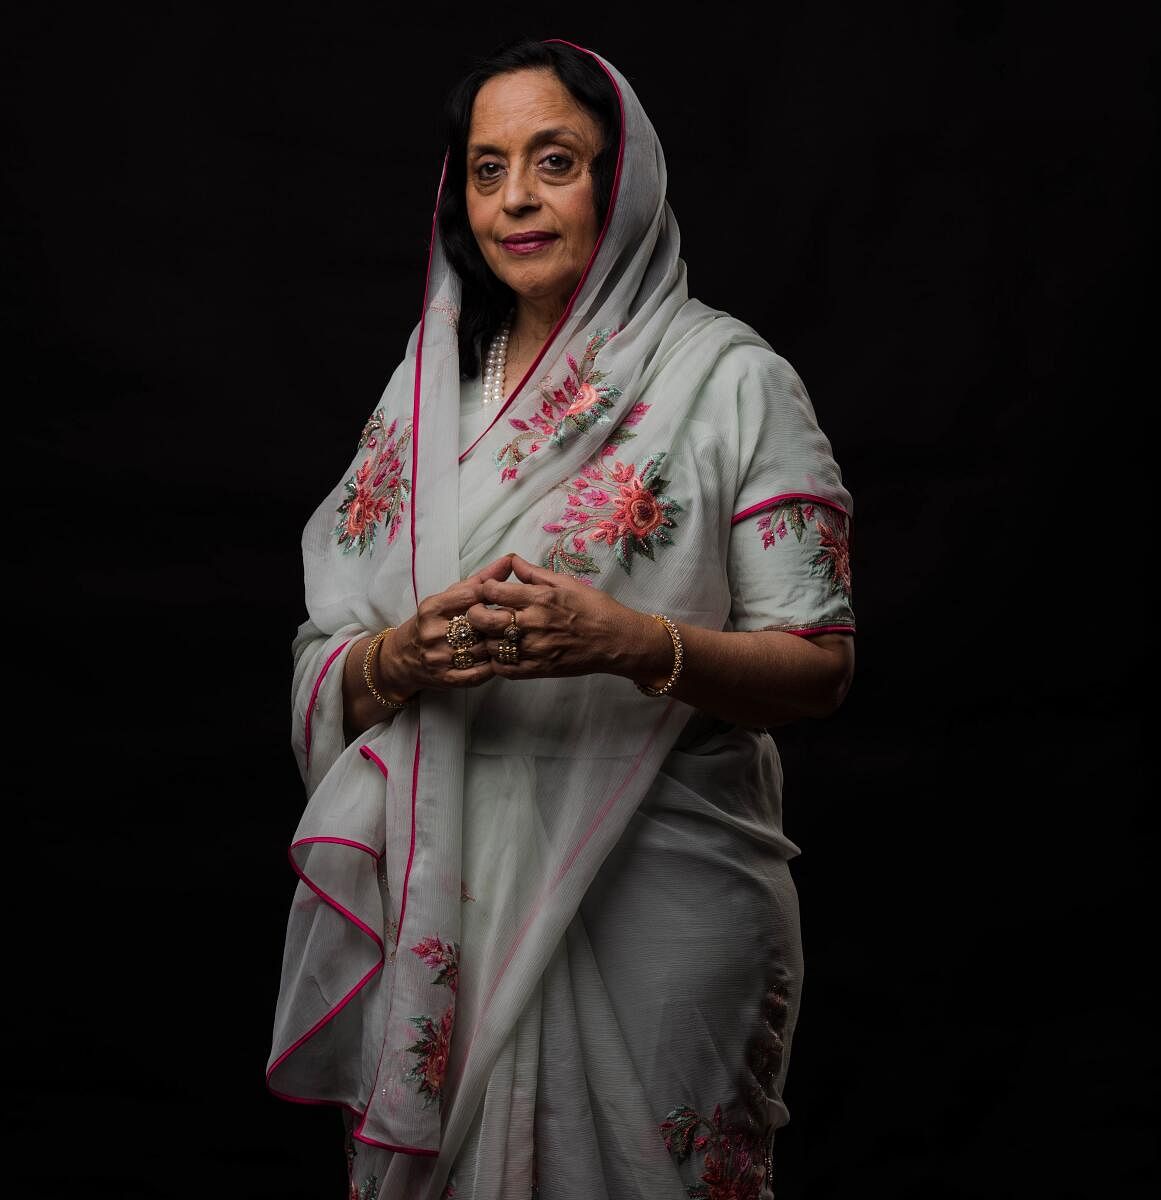 Singer-actor Ila Arun in town for two women-centric plays